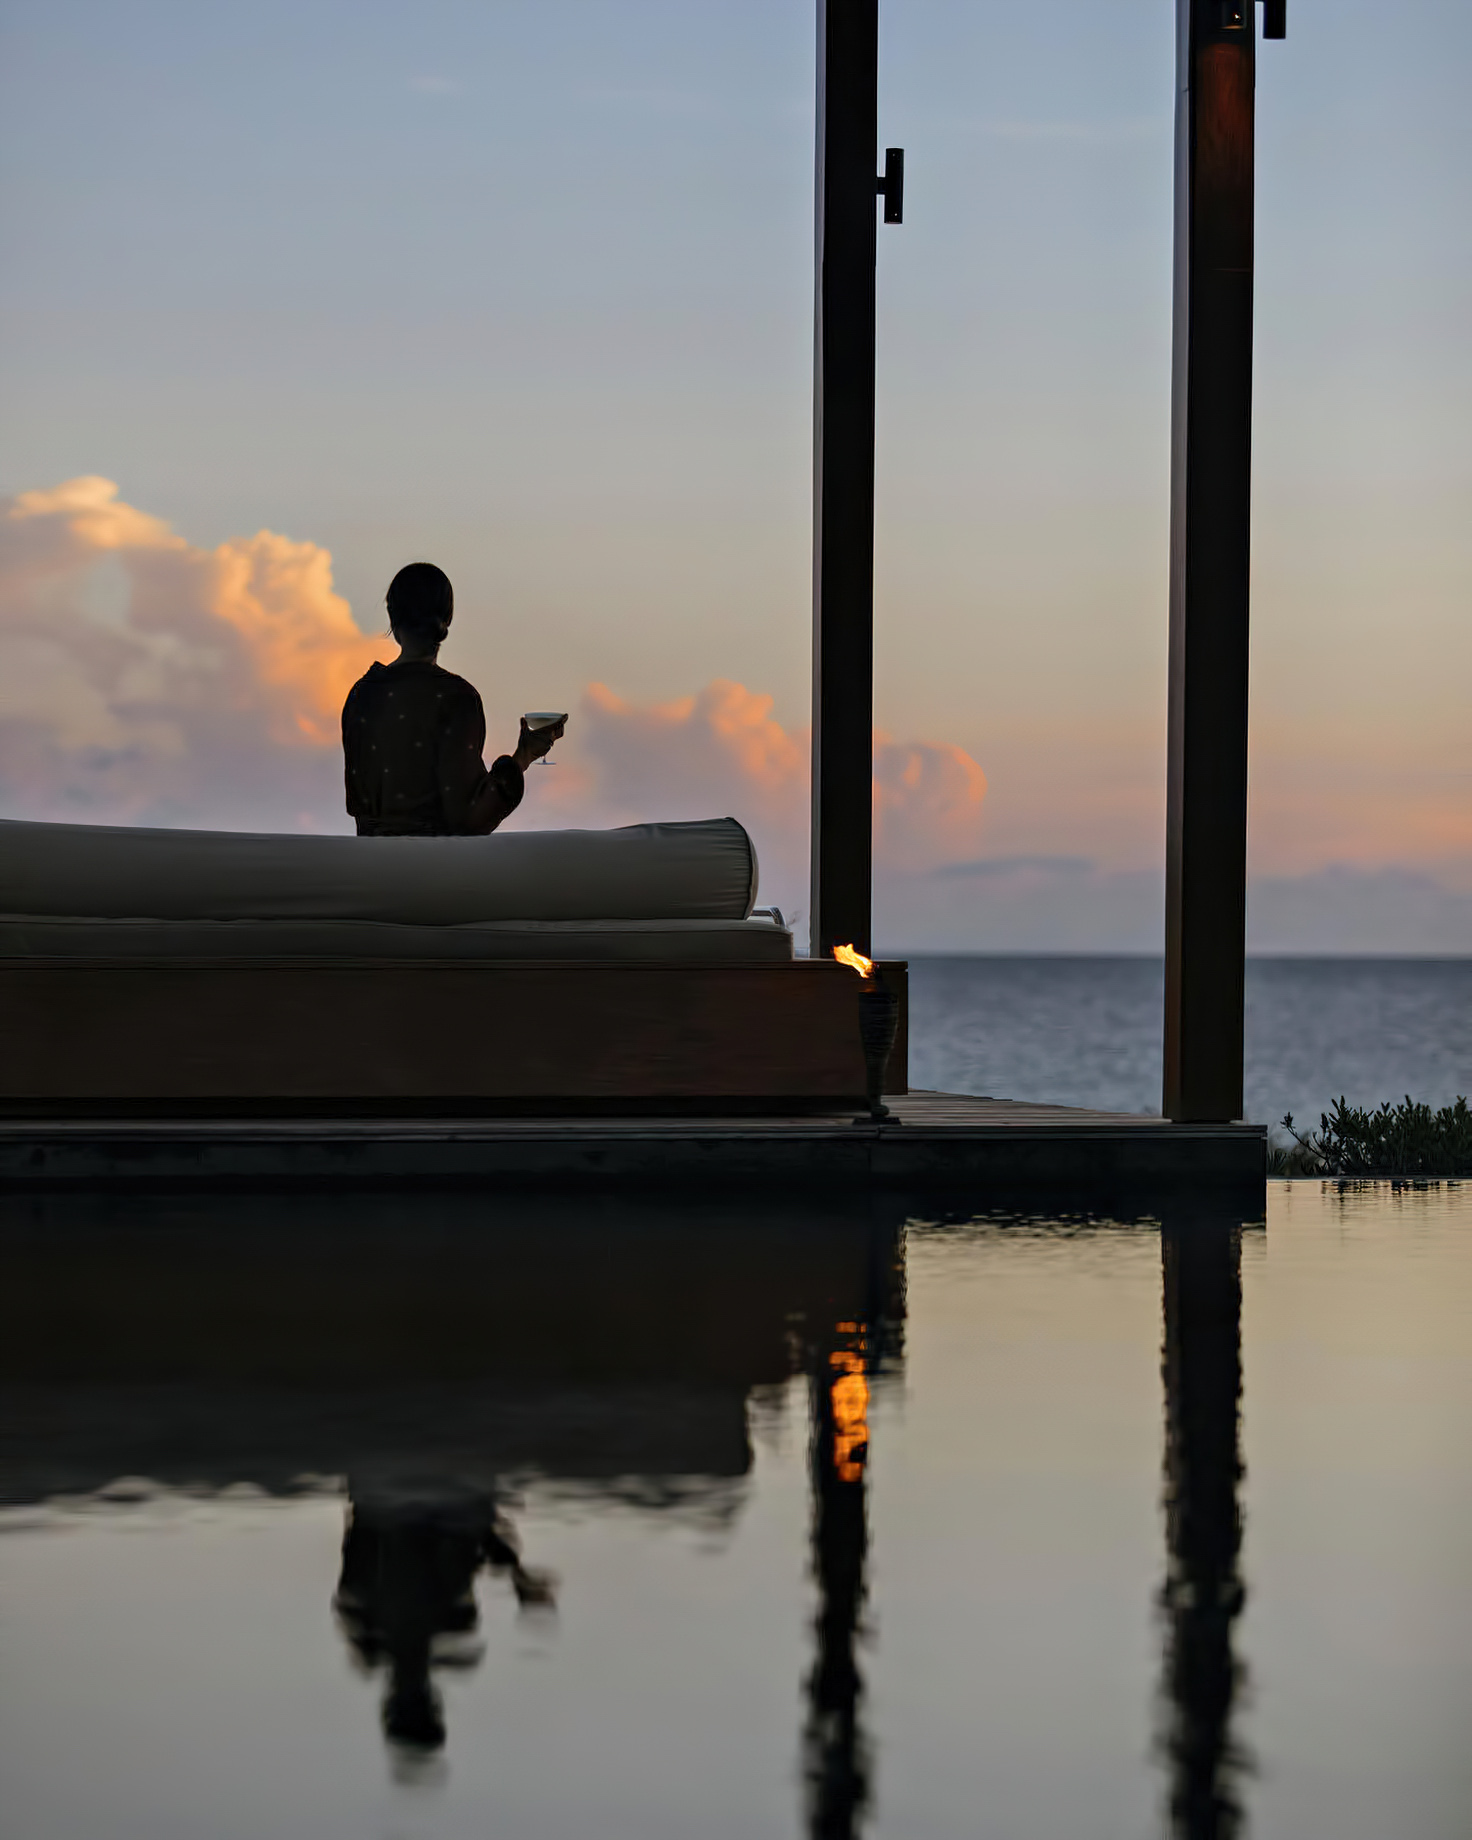 Amanyara Resort – Providenciales, Turks and Caicos Islands – Sunset Poolside Relaxation